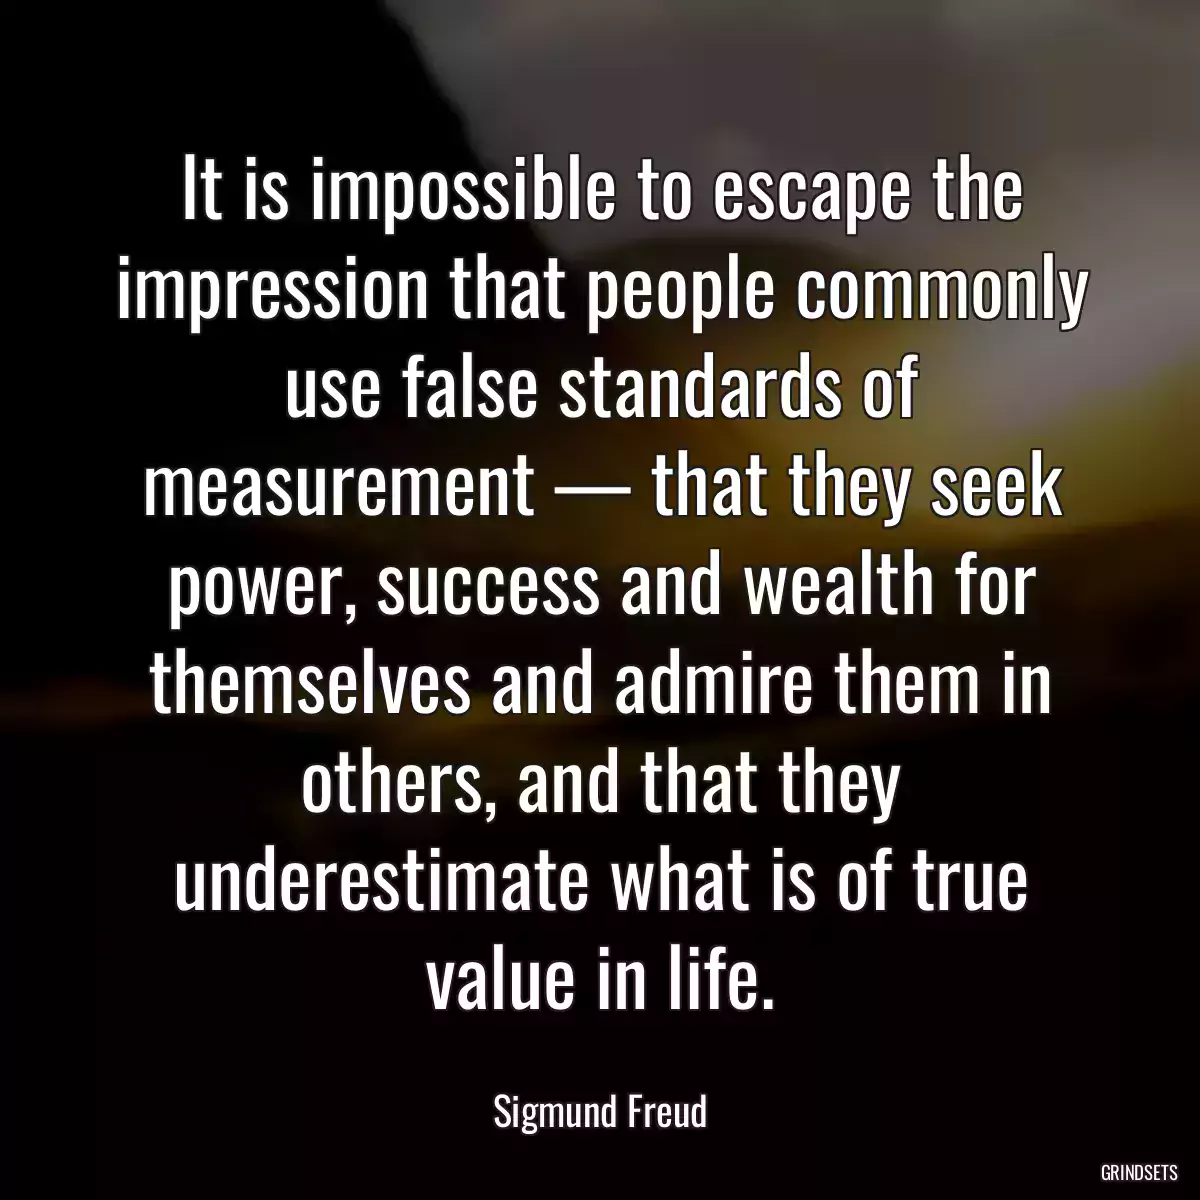 It is impossible to escape the impression that people commonly use false standards of measurement — that they seek power, success and wealth for themselves and admire them in others, and that they underestimate what is of true value in life.